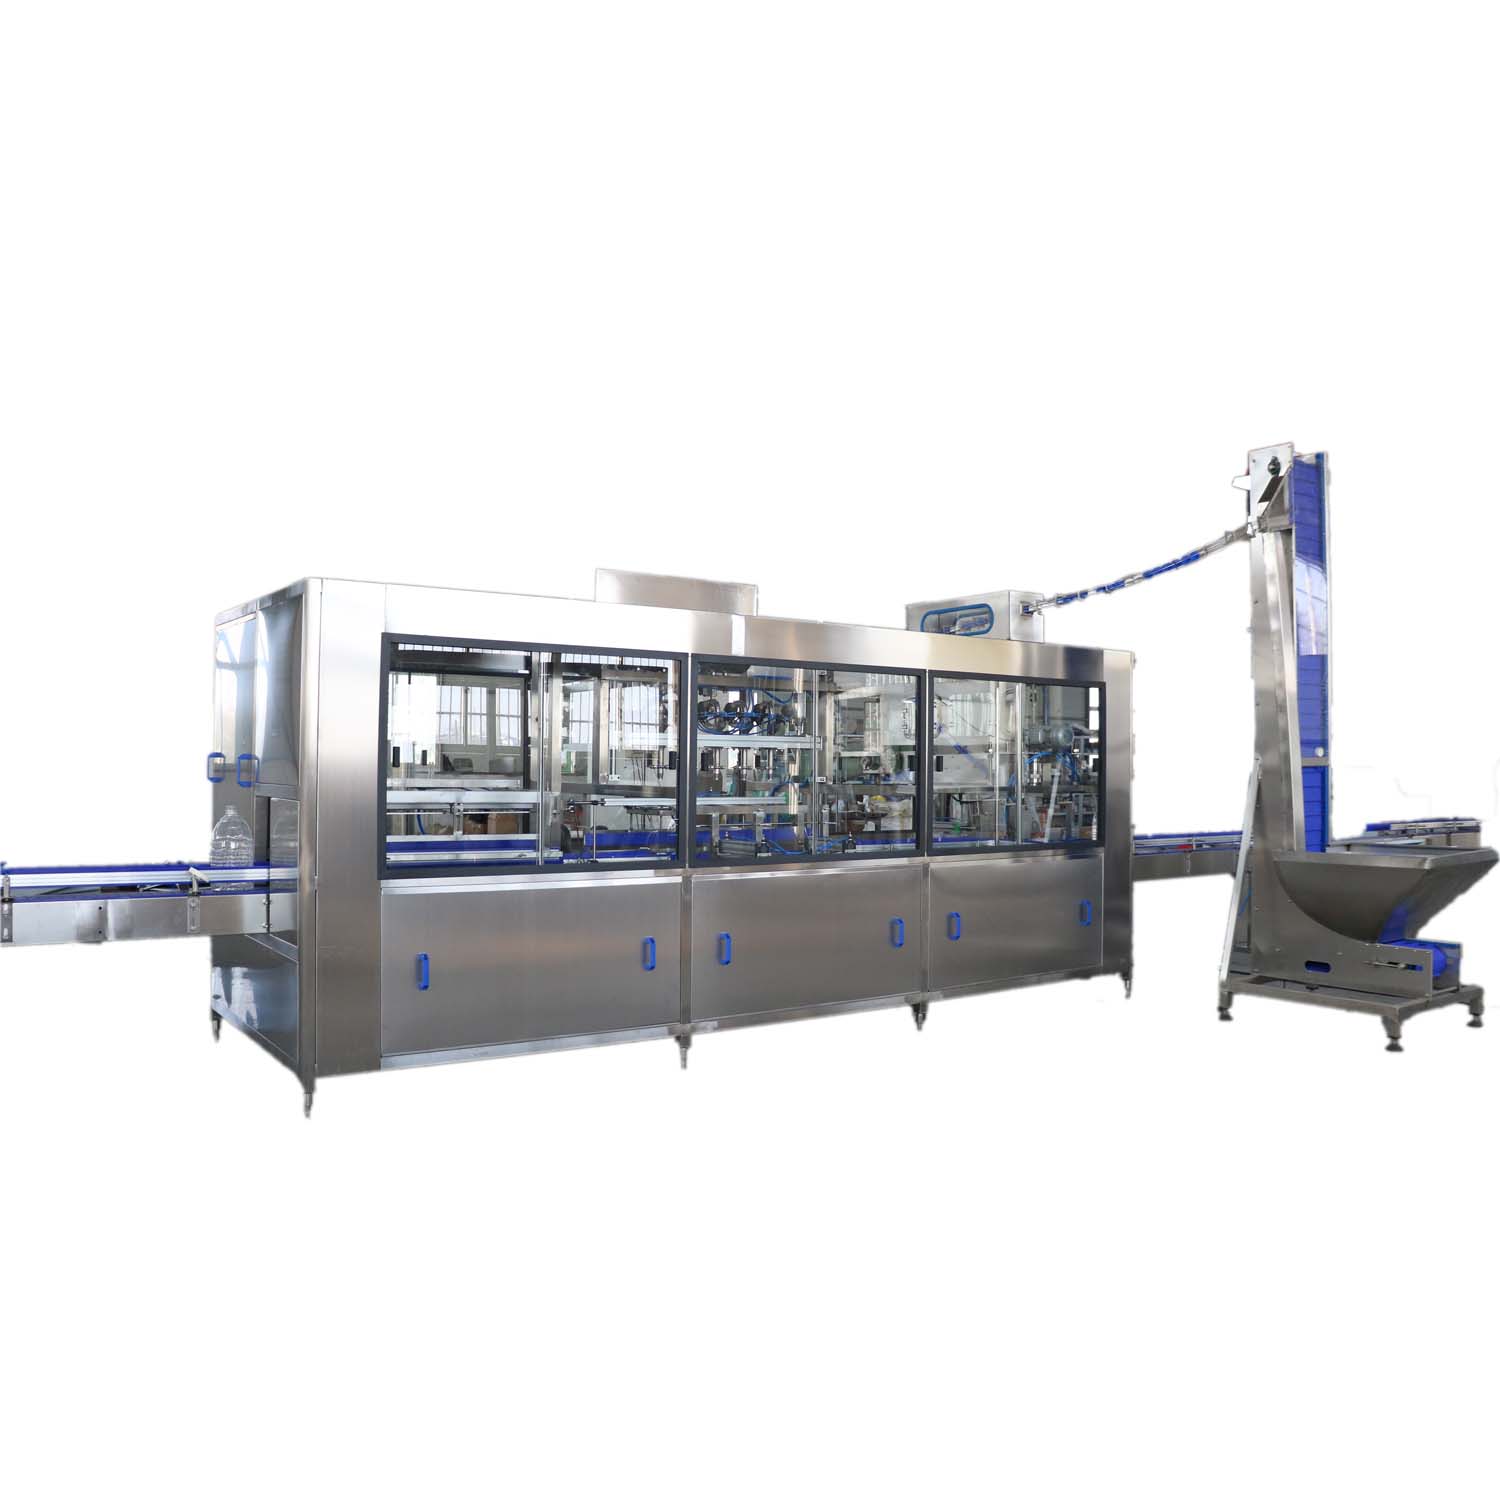 The feature of Plastic Bottle filling machine 